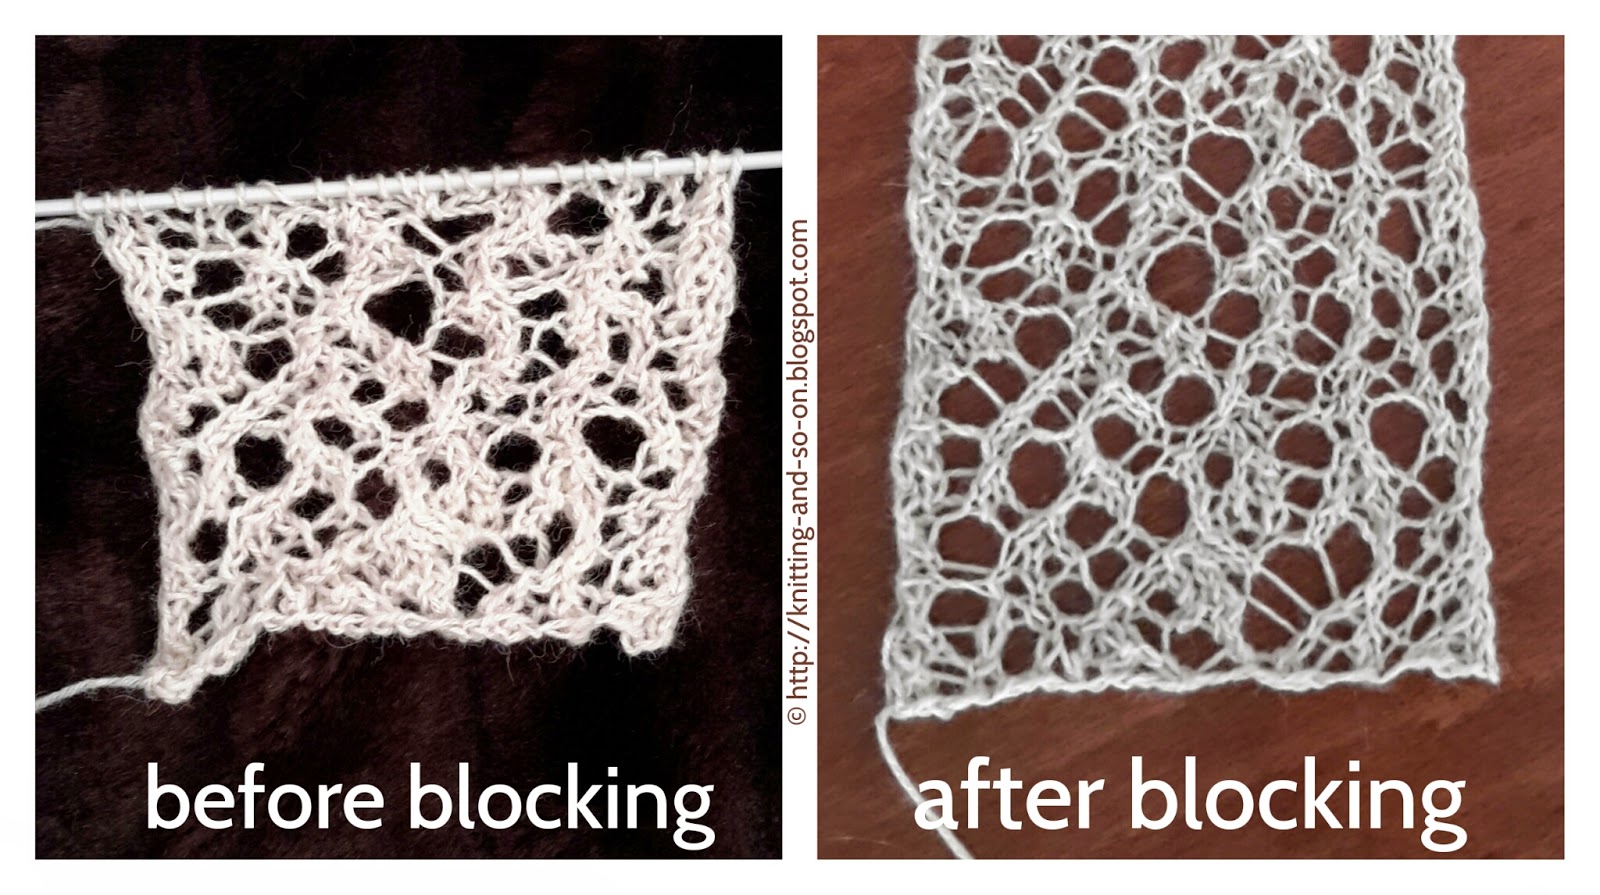 Random Lace before and after blocking. http://knitting-and-so-on.blogspot.com